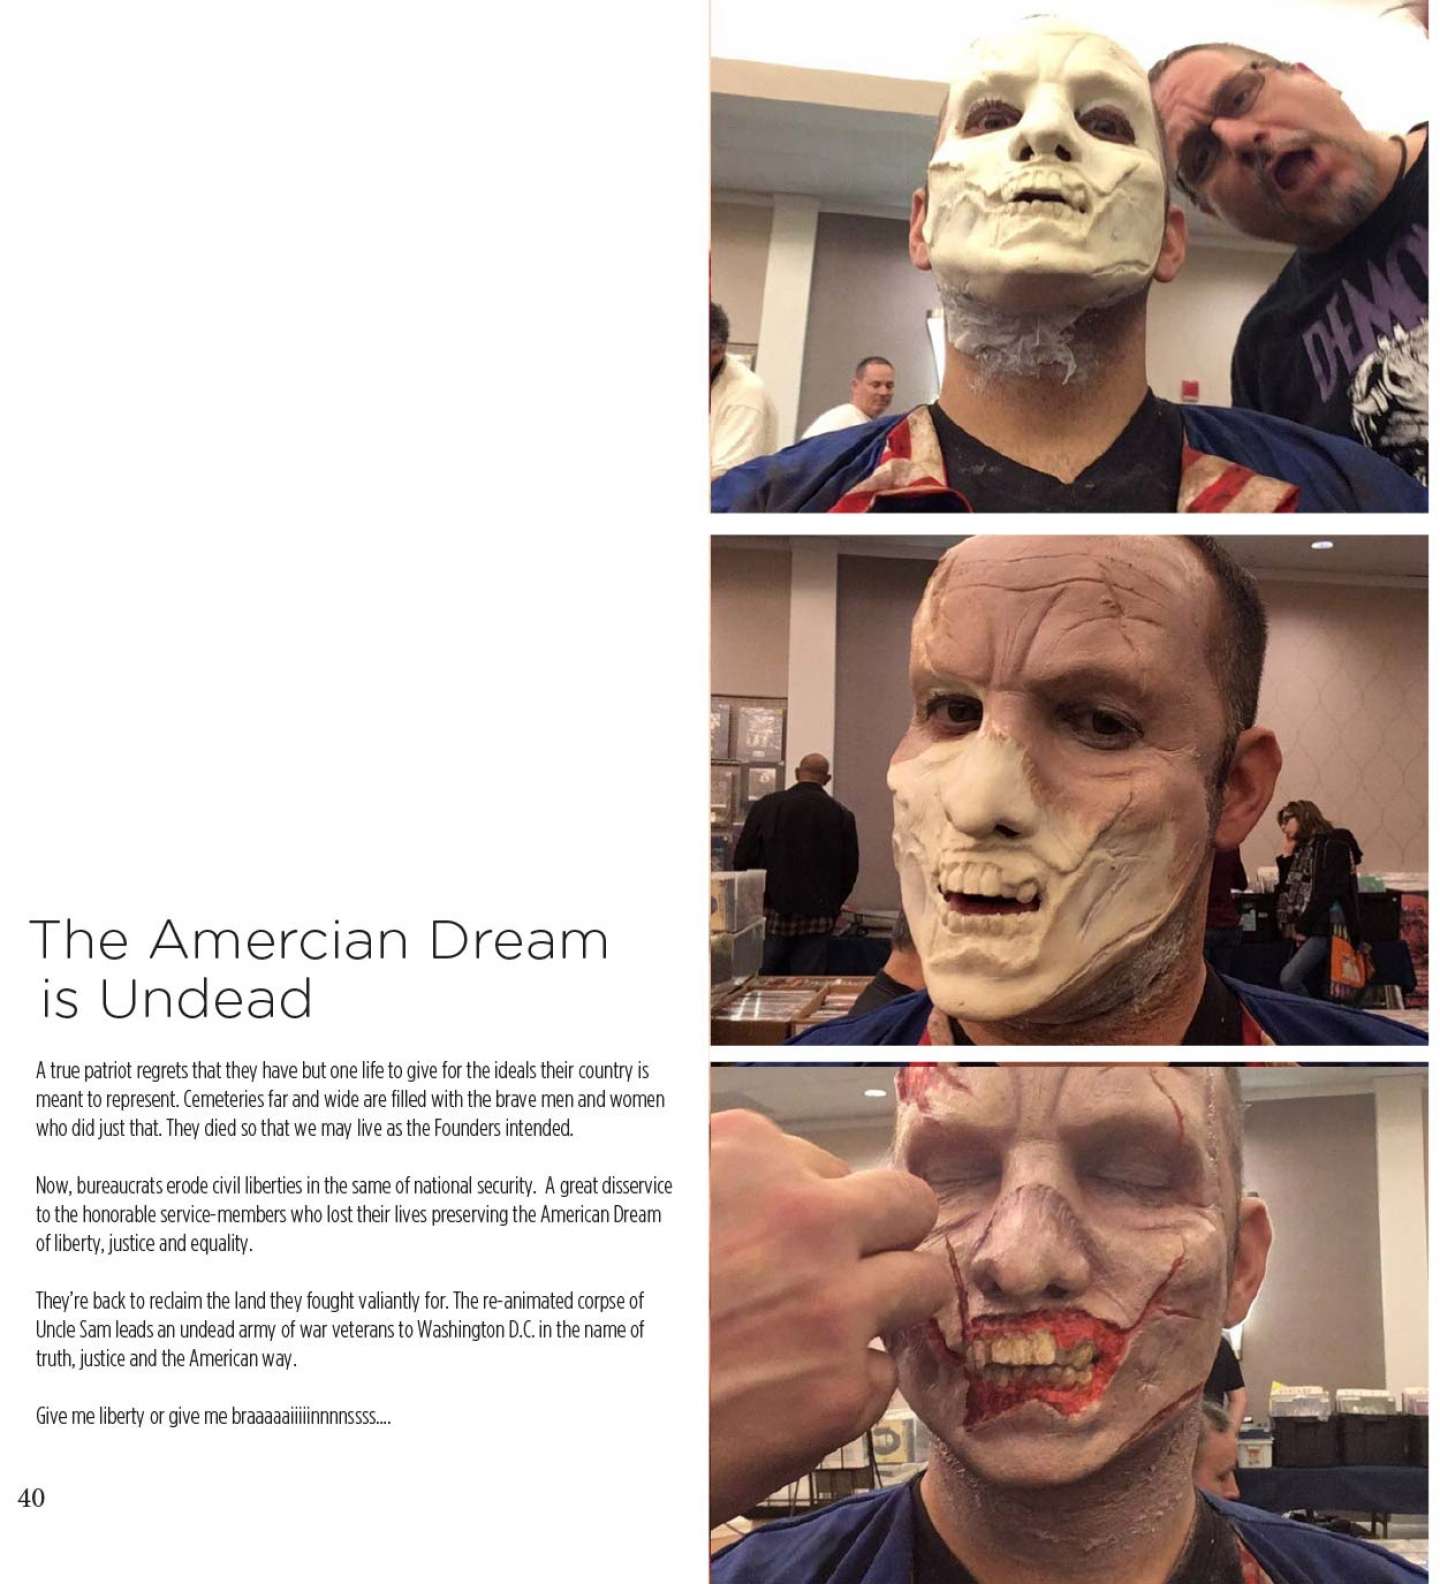 The American Dream is Undead